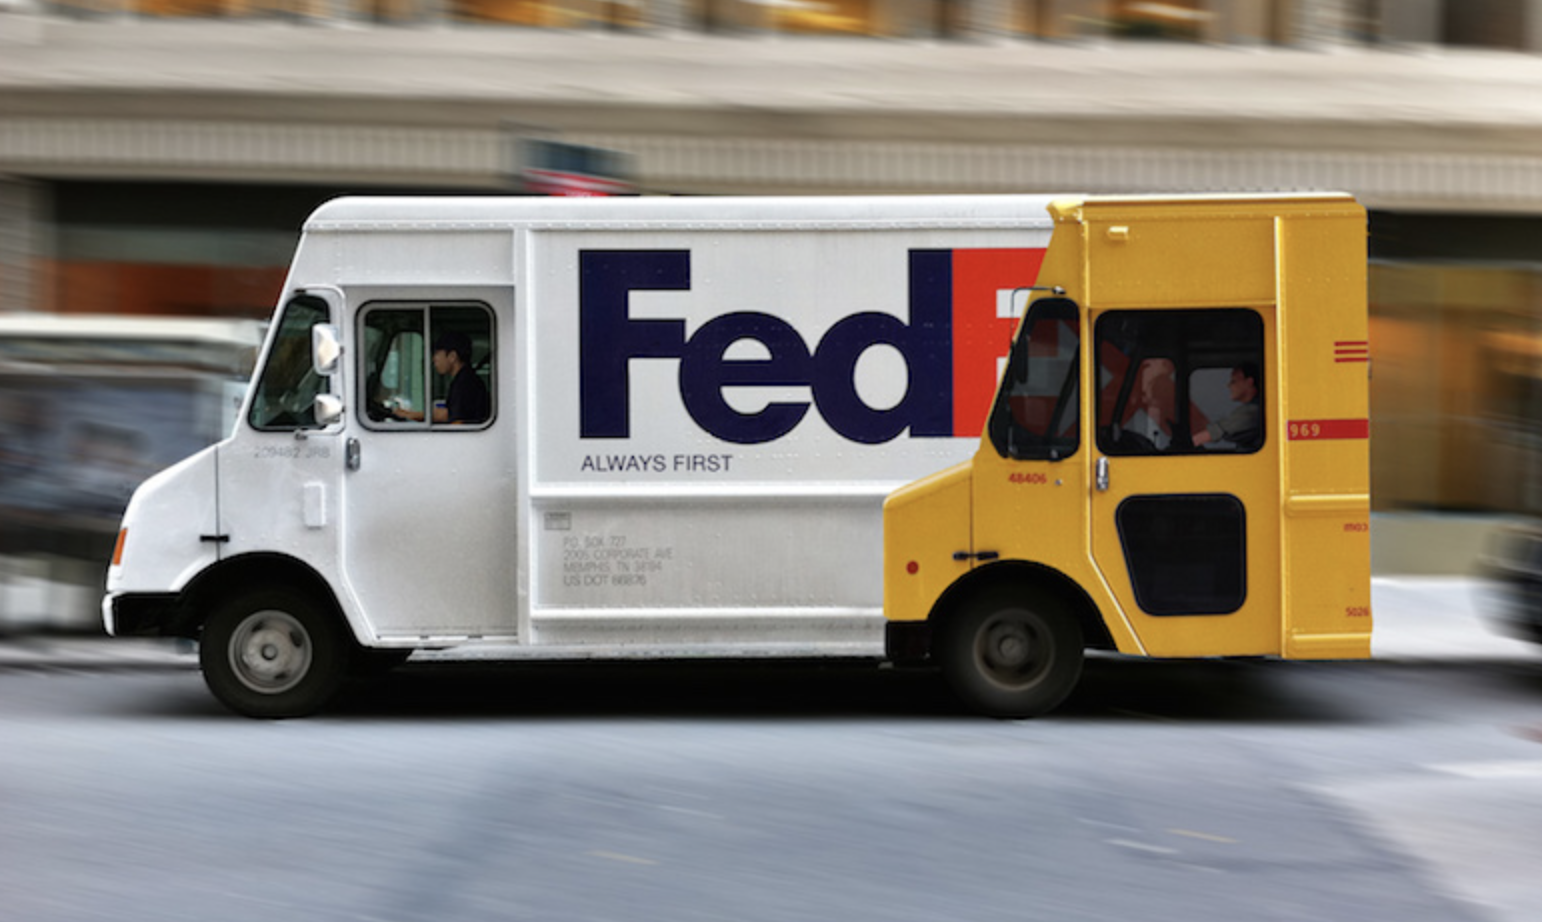 clever truckside advertising by Fedex